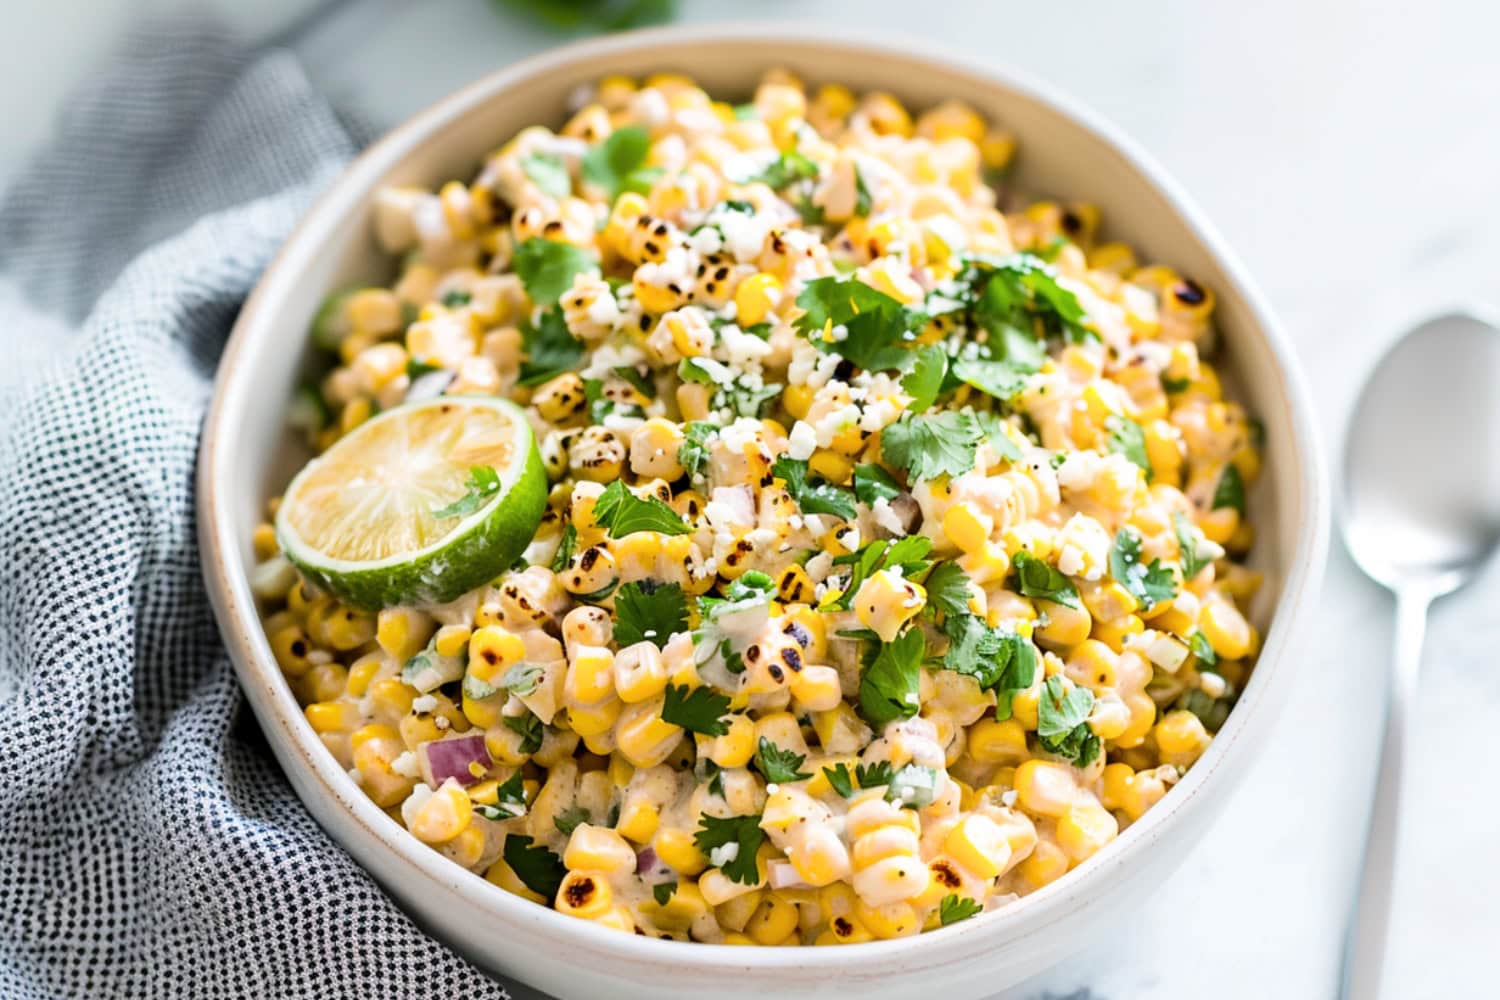 Creamy and bursting with flavor homemade Mexican street corn salad garnished with cilantro